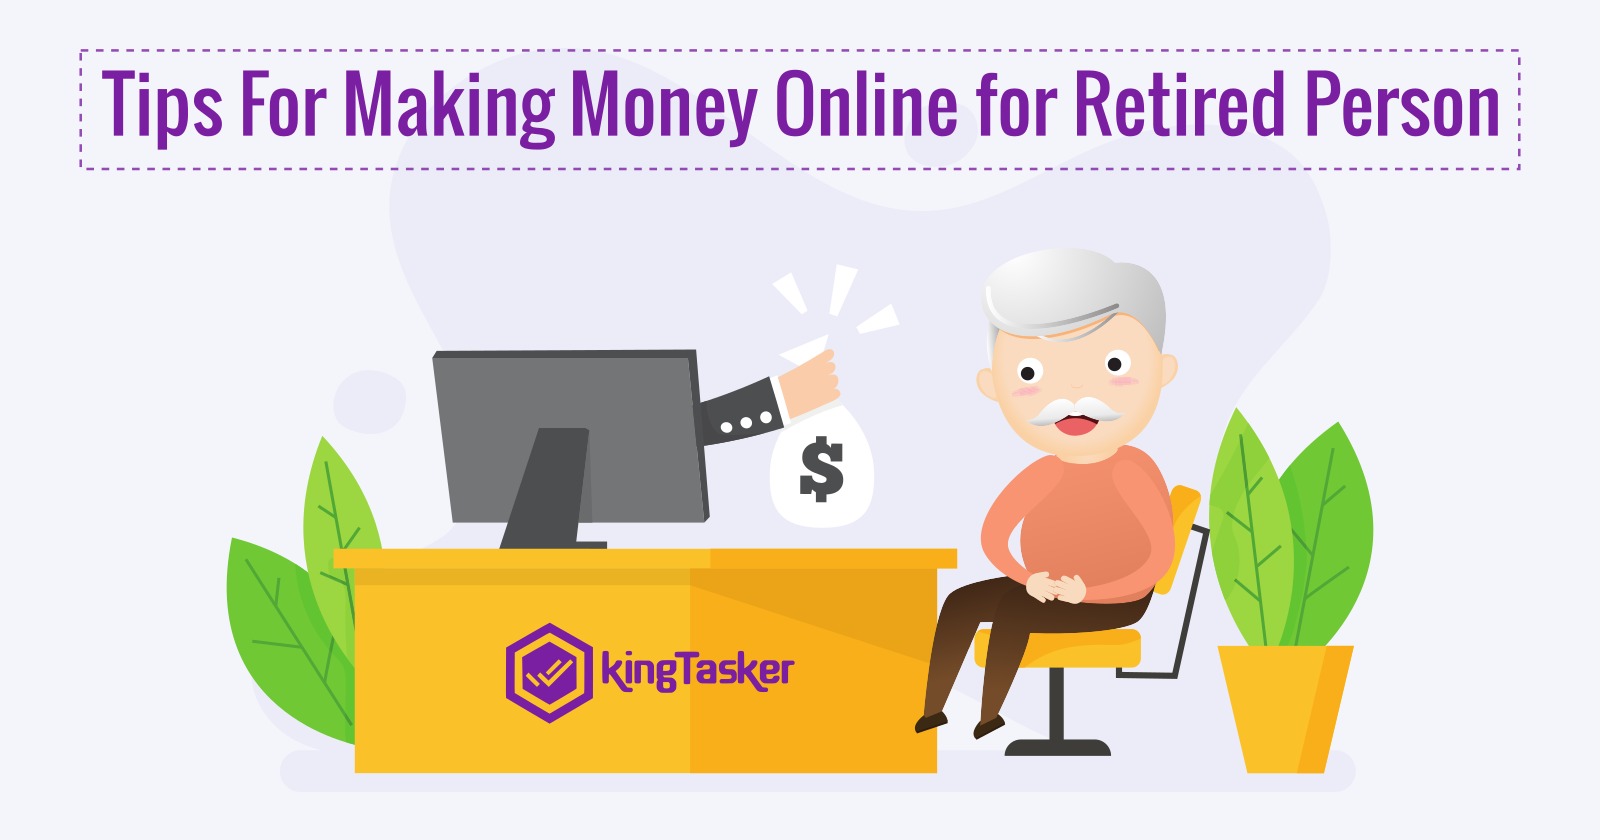 Tips For Making Money Online for Retired Person